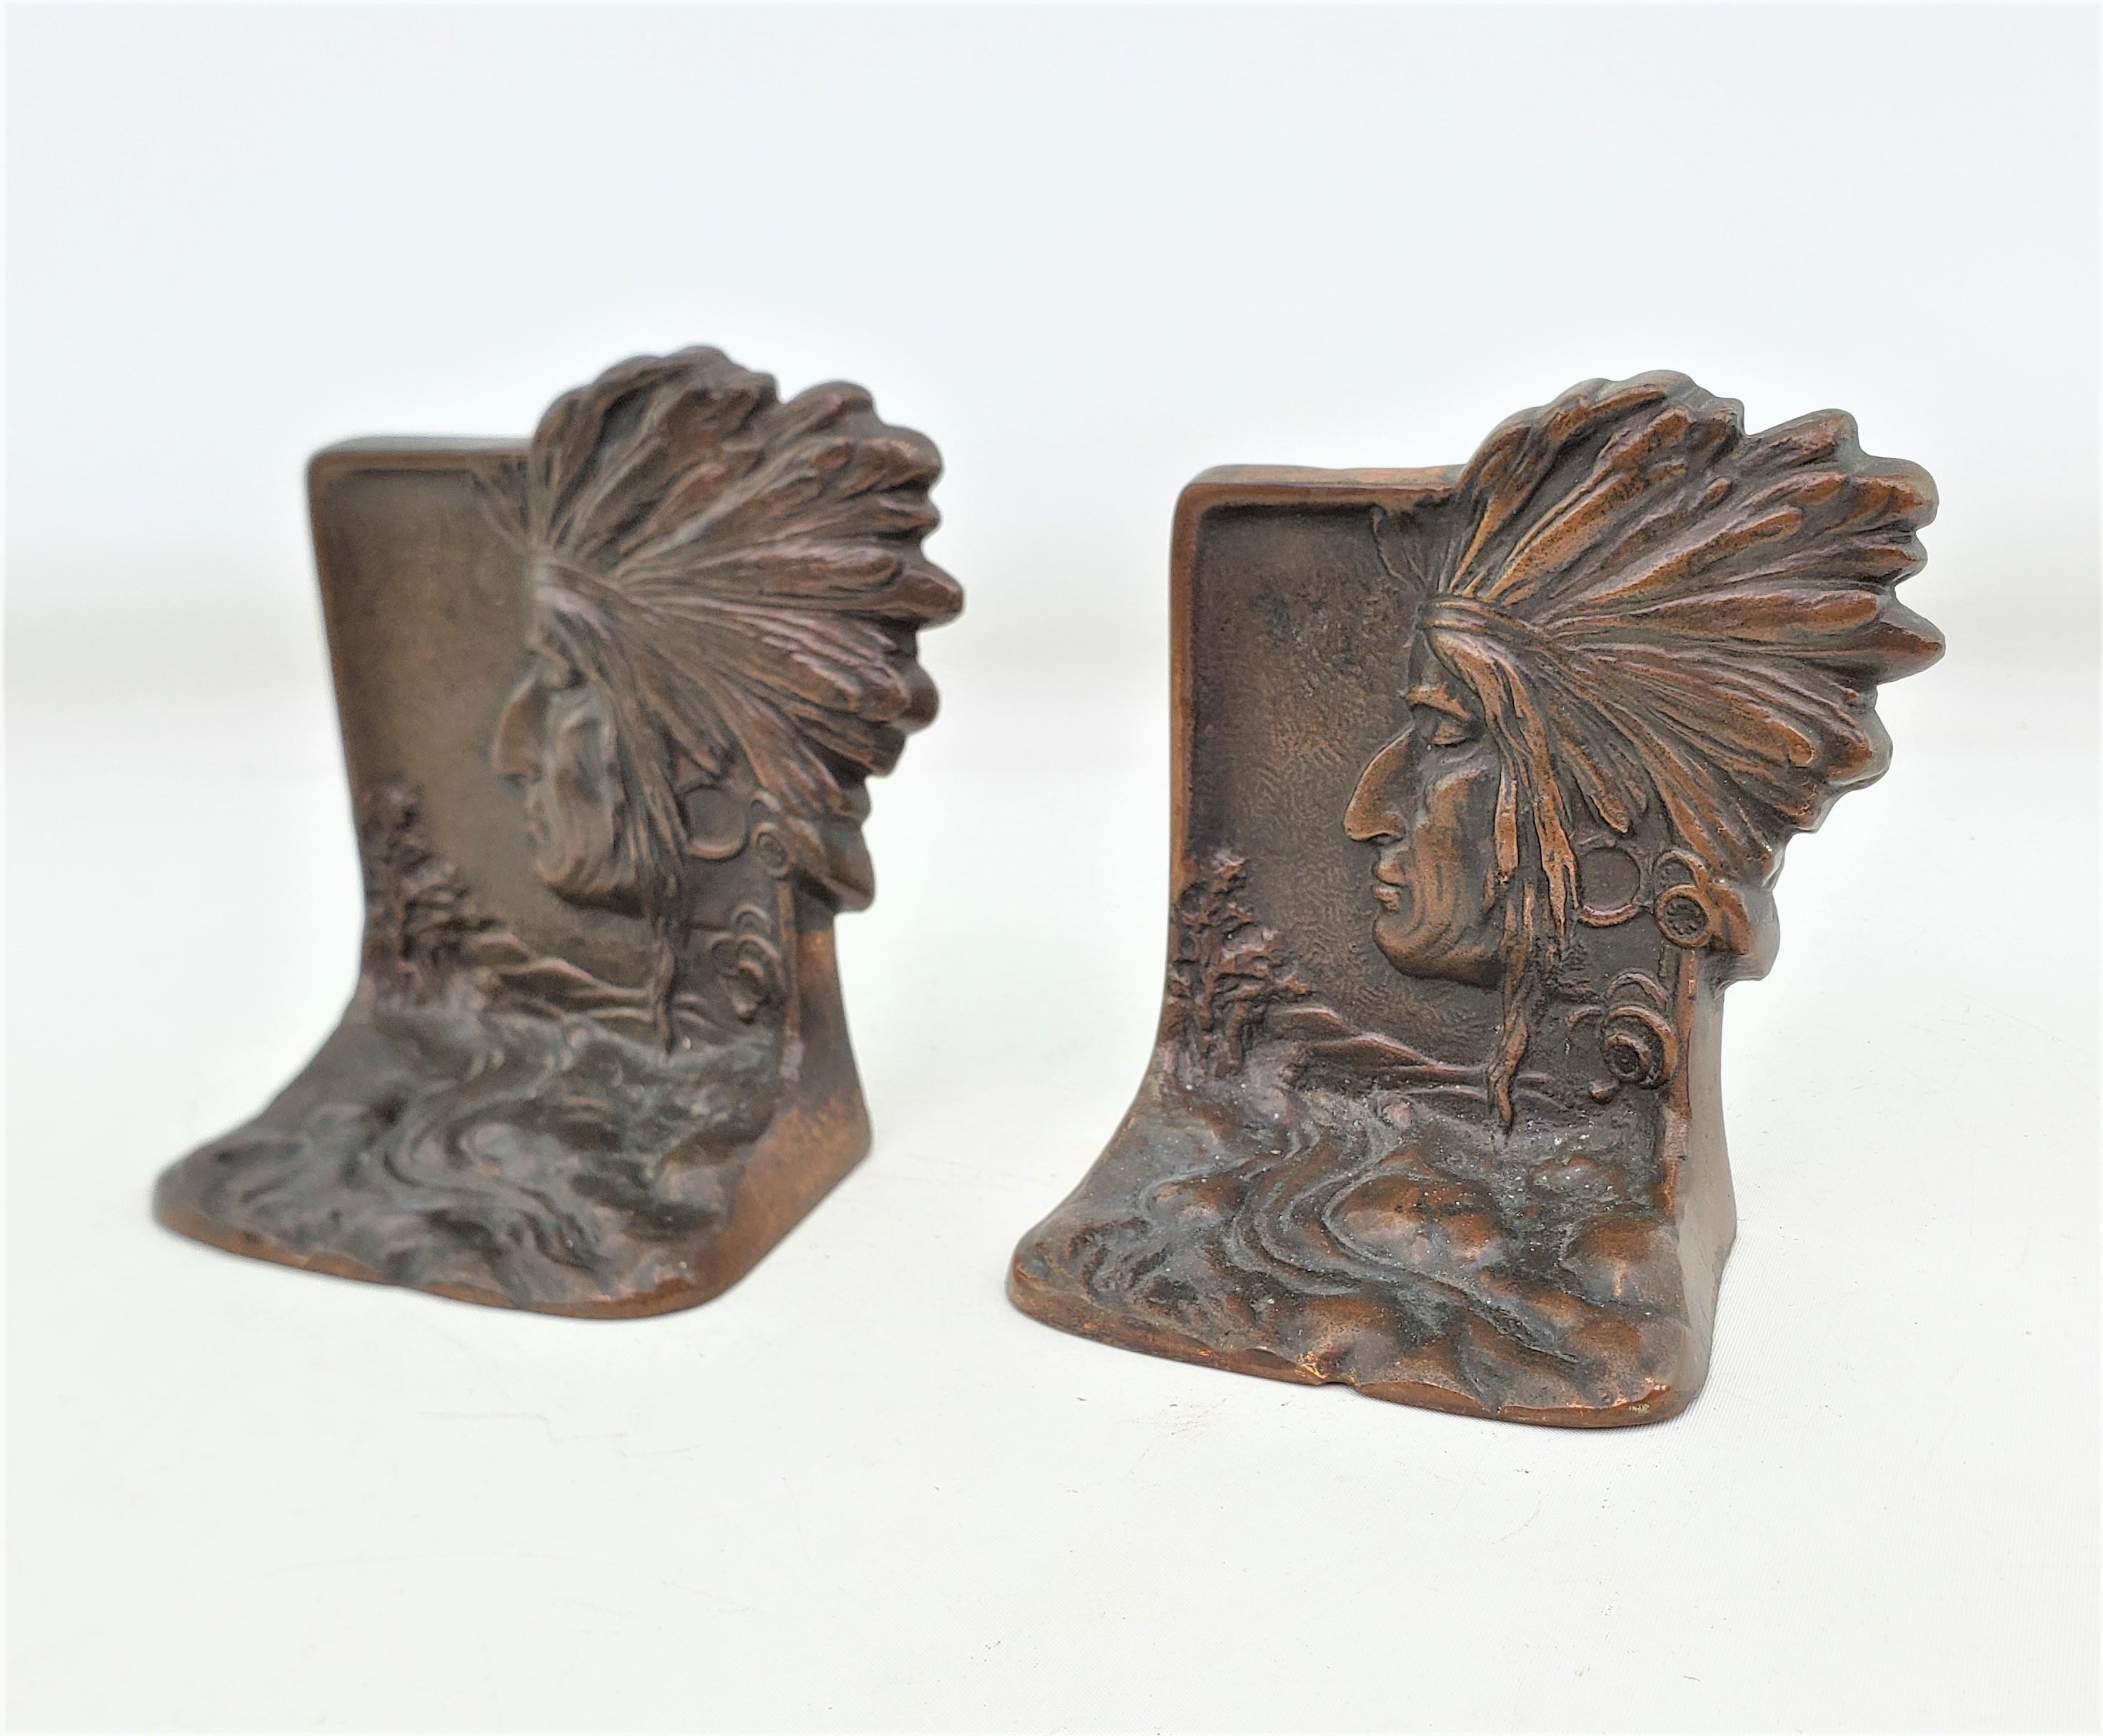 Antique Art Deco Cast & Patinated Bookends Depicting an Indigenous Warrior In Good Condition For Sale In Hamilton, Ontario